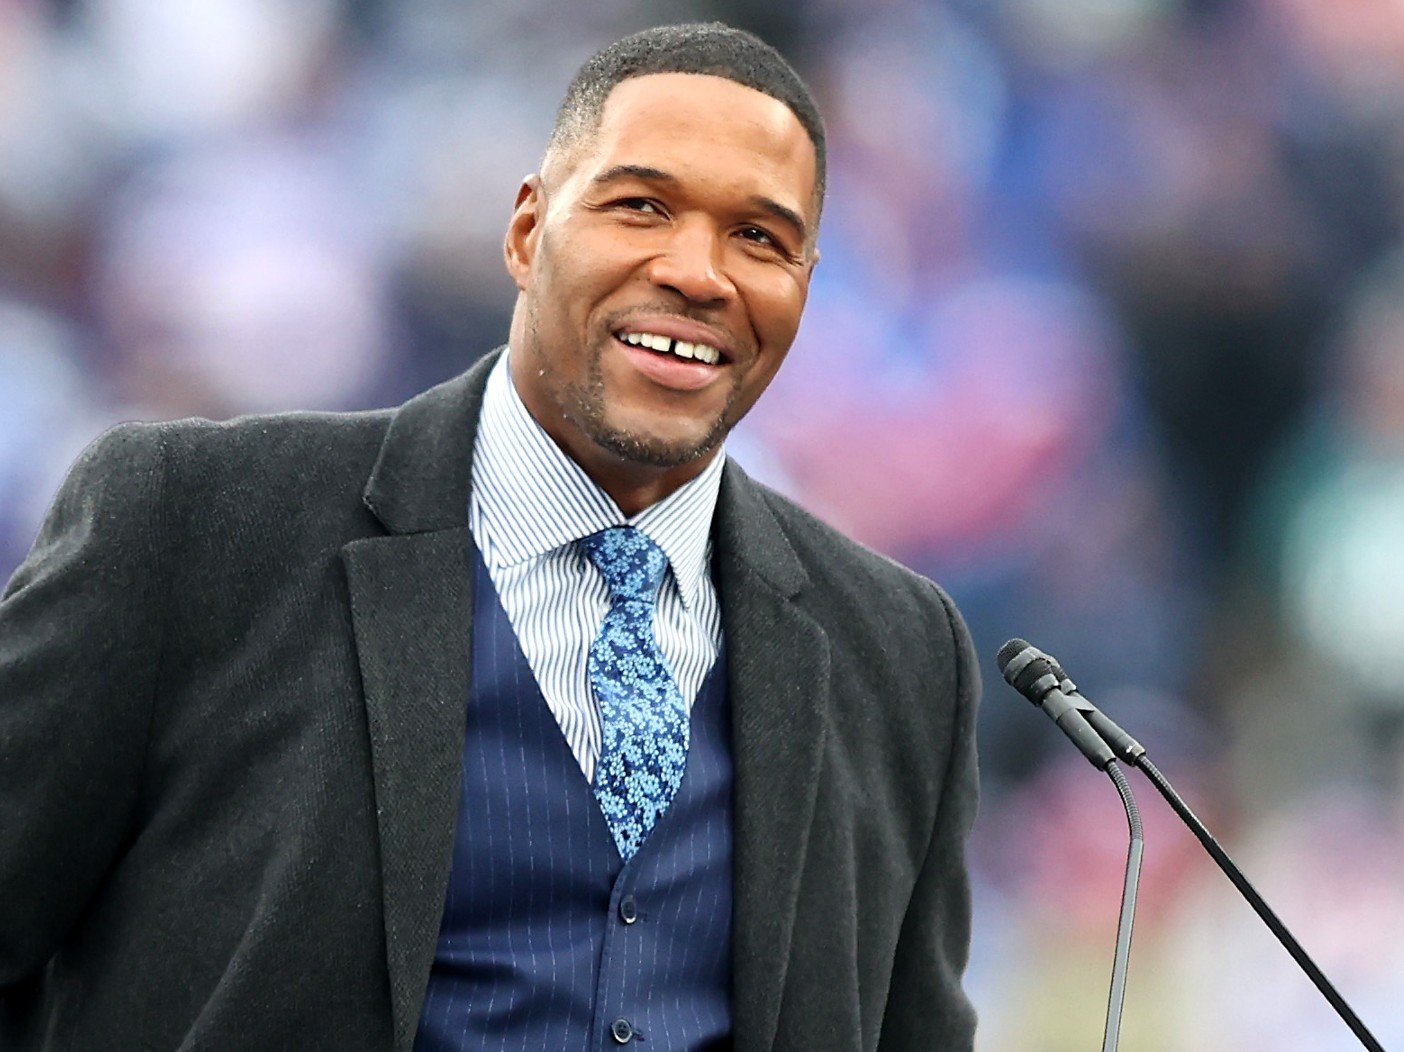 Michael Strahan Opens Up About Emotions In Candid Video